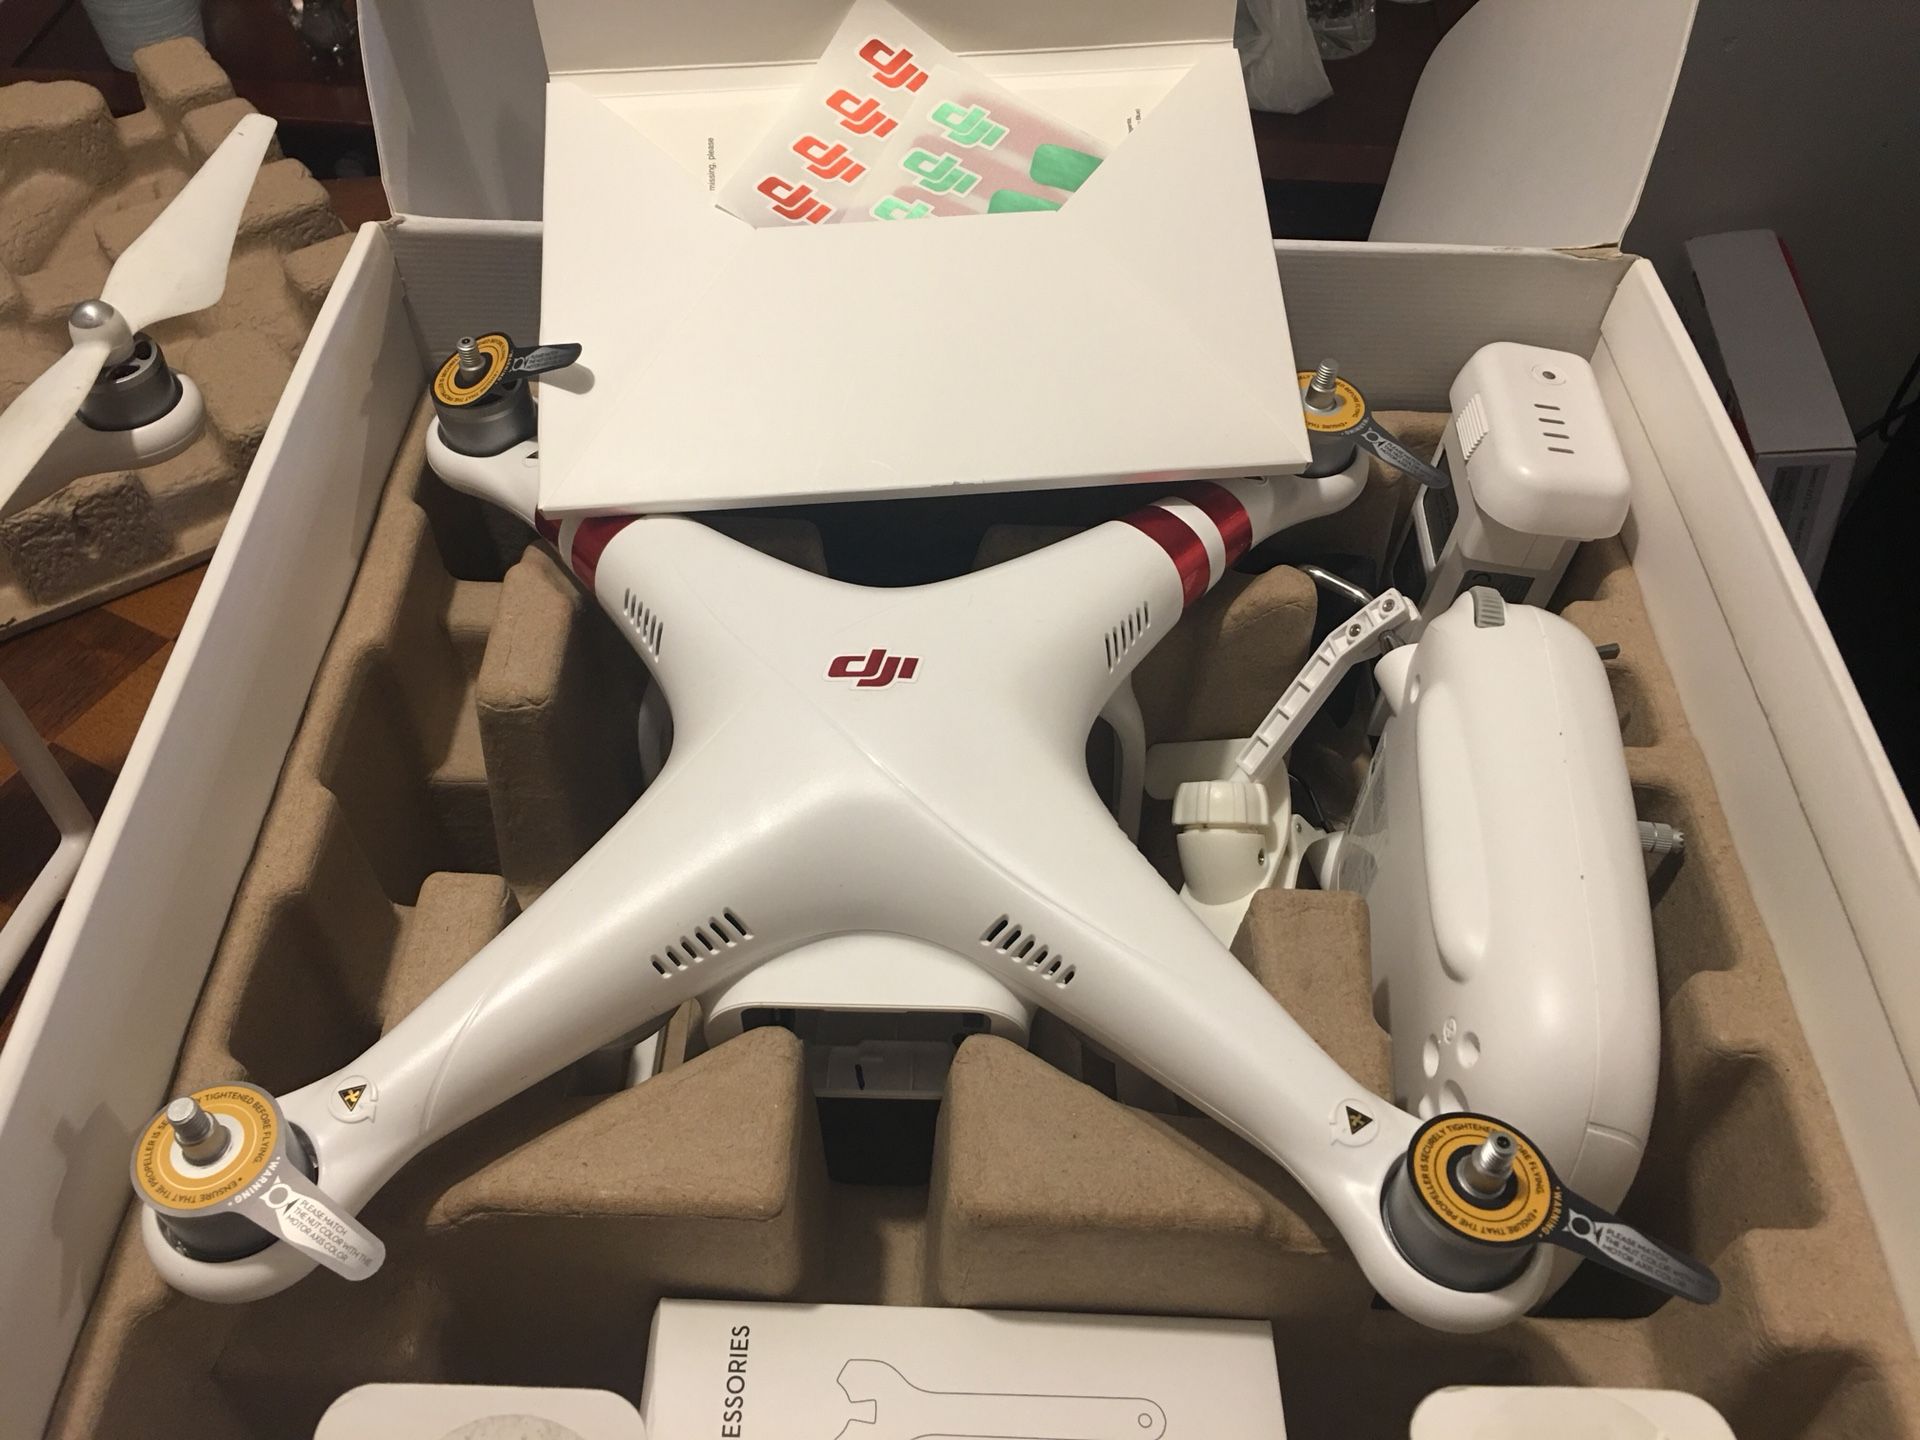 2 phantom 3 STANDARD one race YKS drones package one new in box lots of extras